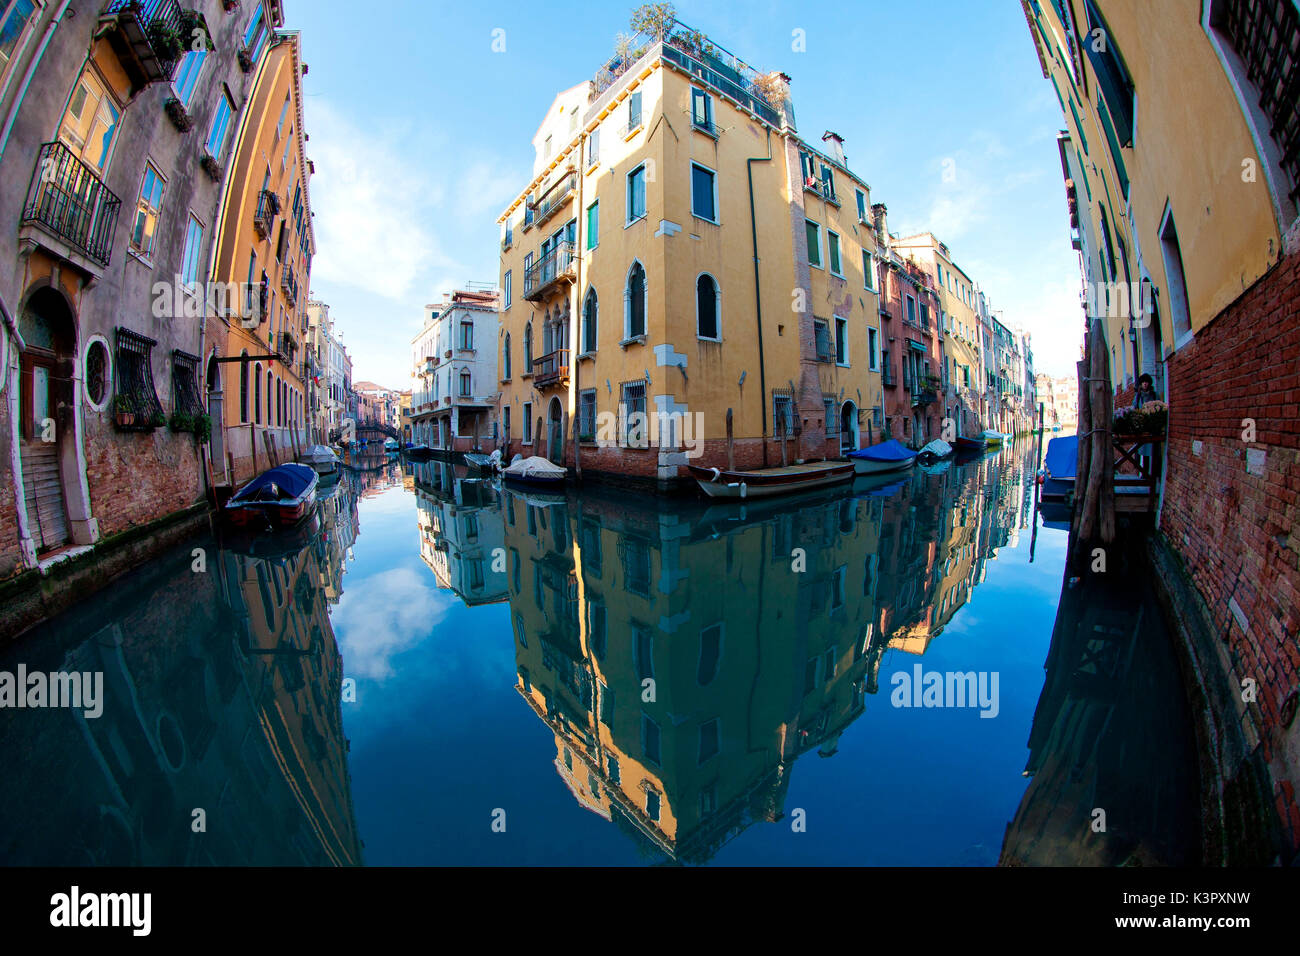 Some typical Venetian houses reflecting in the still water of the channels in a clear winter day  Venice, Veneto Italy Europe Stock Photo